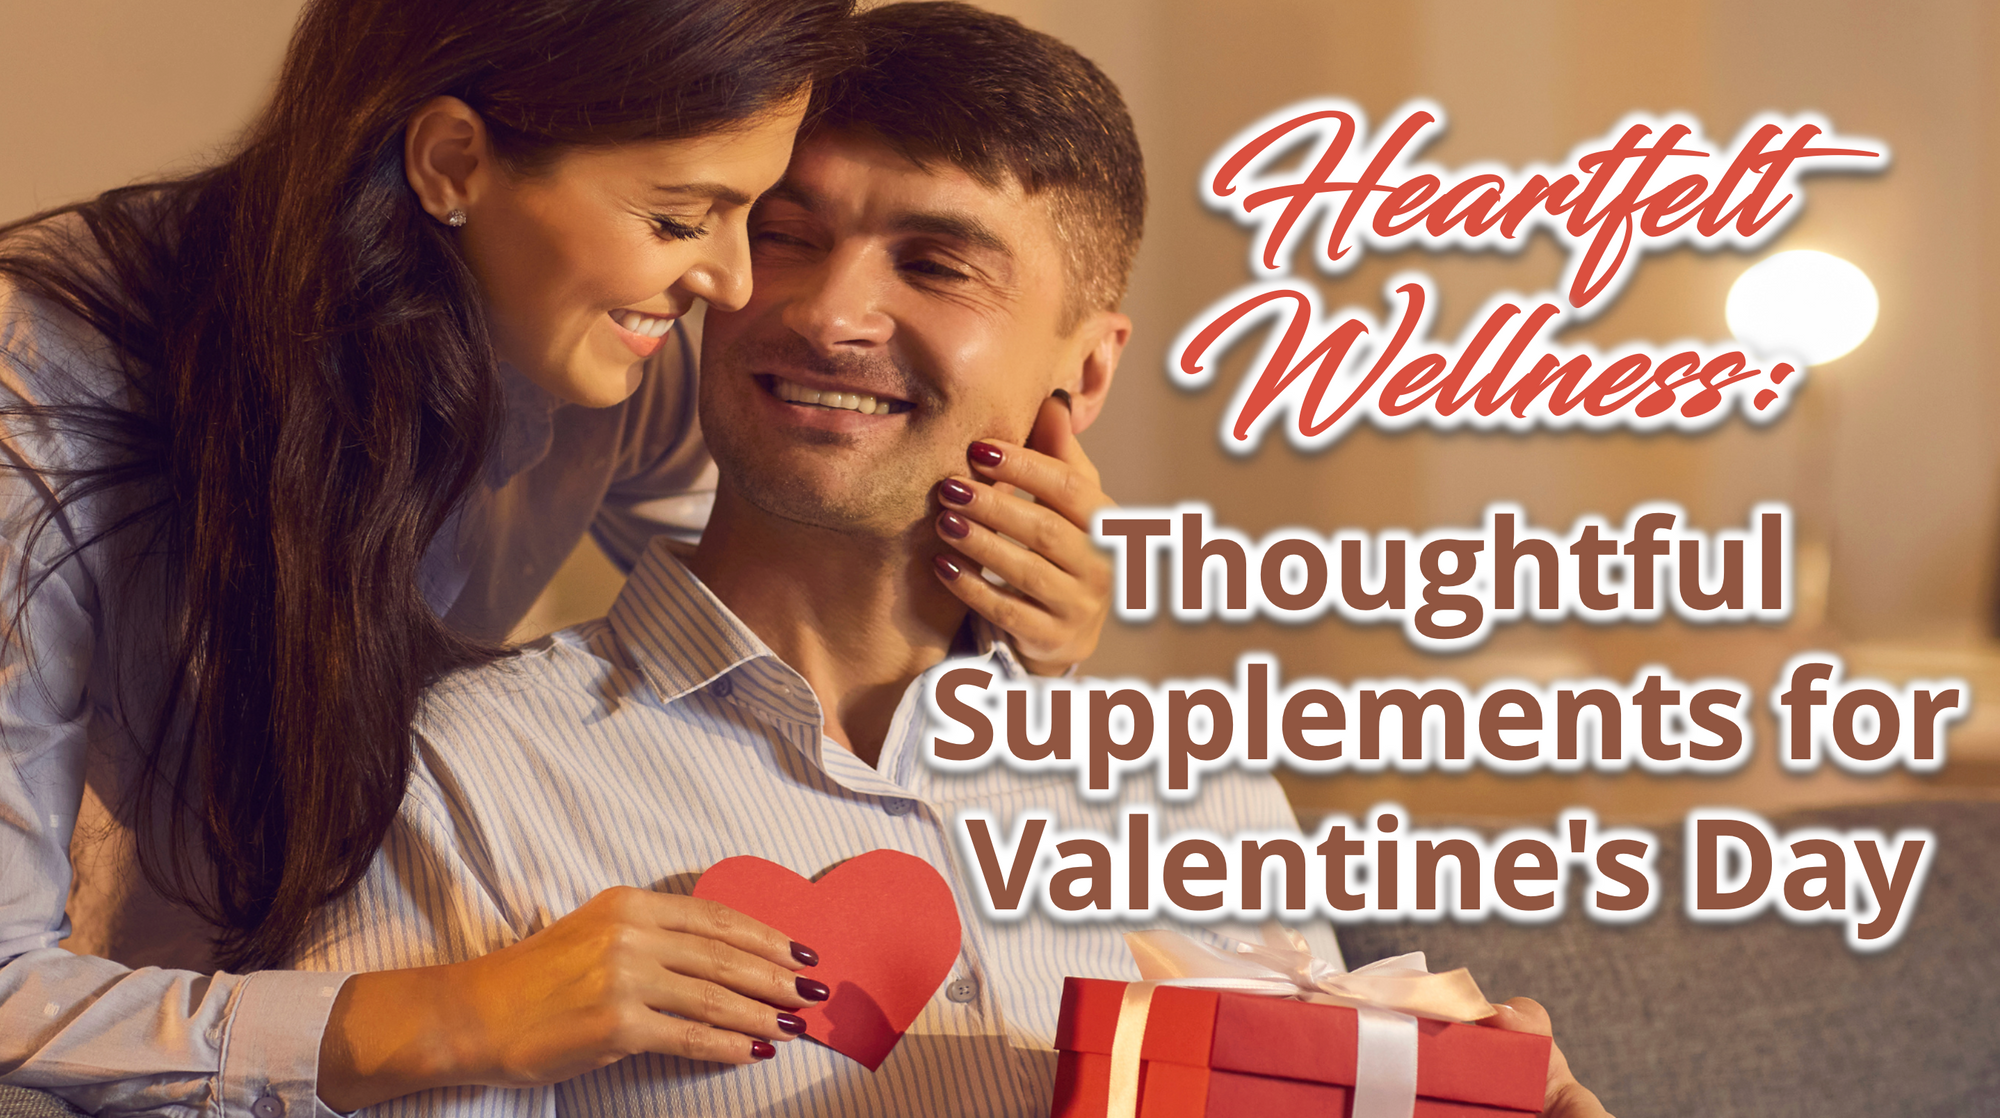 Heartfelt Wellness: Thoughtful Supplements for Valentine's Day